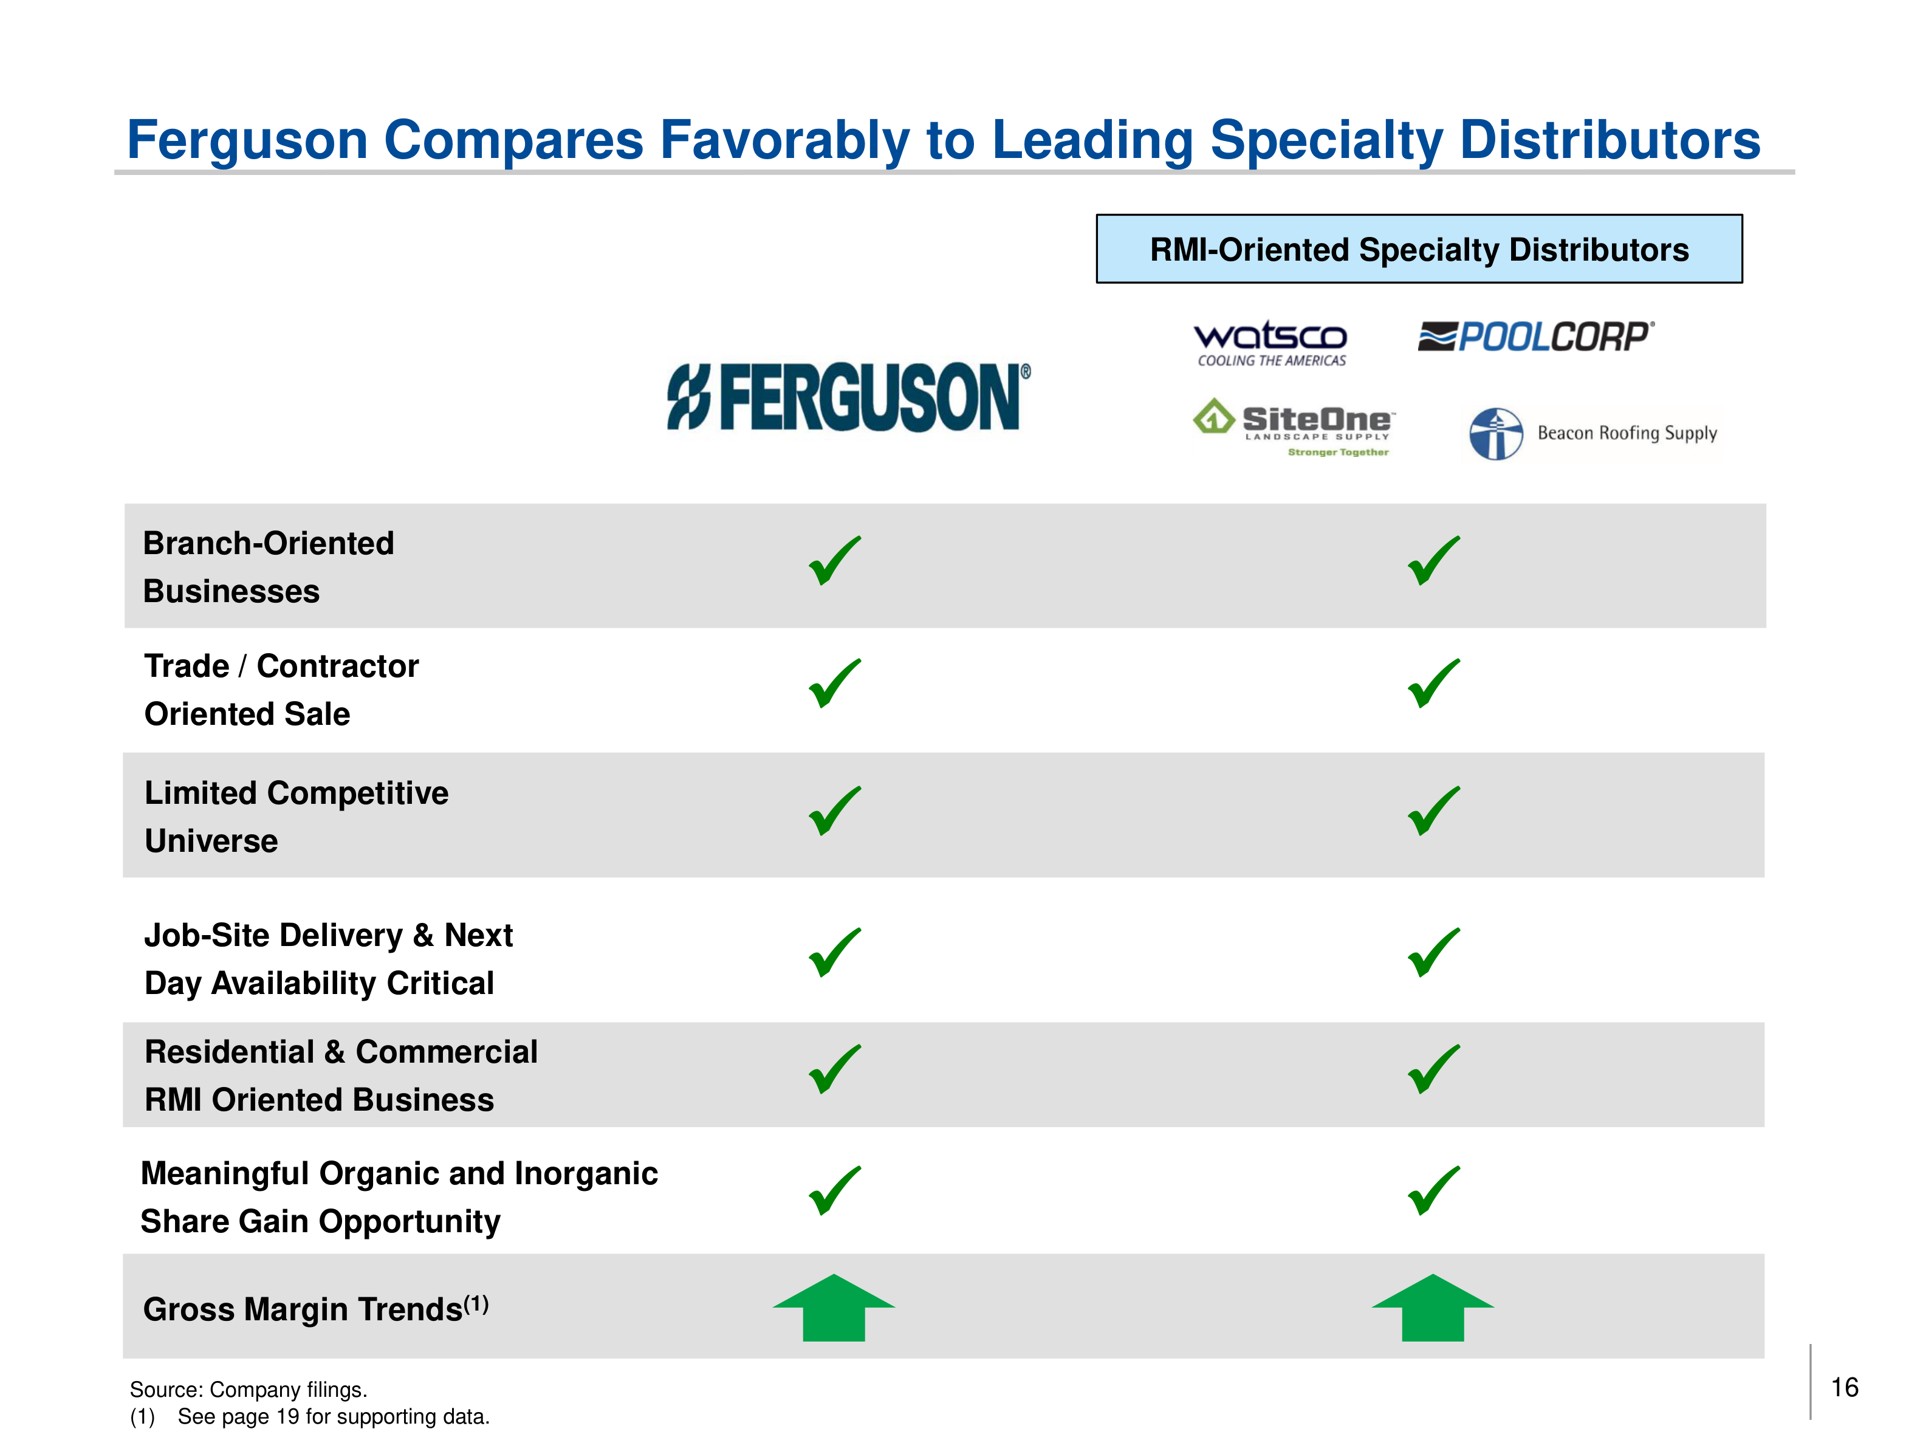 compares favorably to leading specialty distributors a | Trian Partners